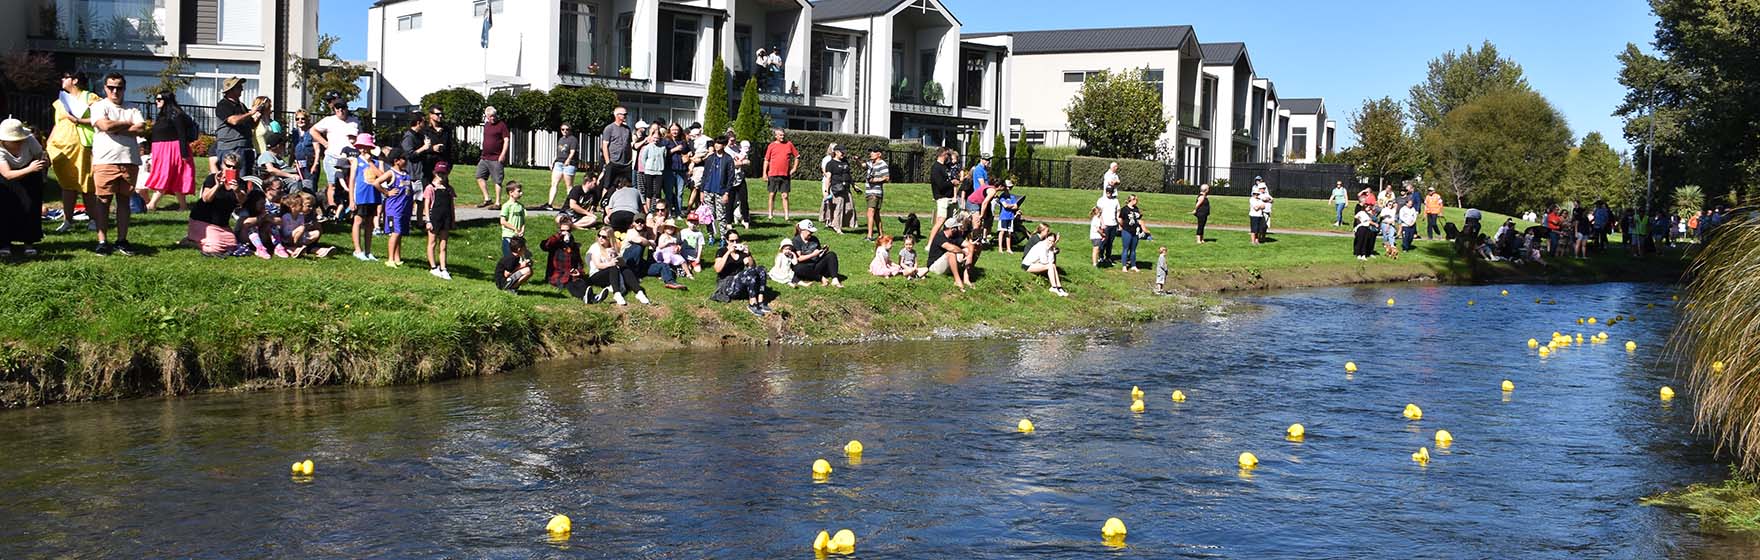 families gather on the bank of Silverstream and watch yellow ducks float down the river